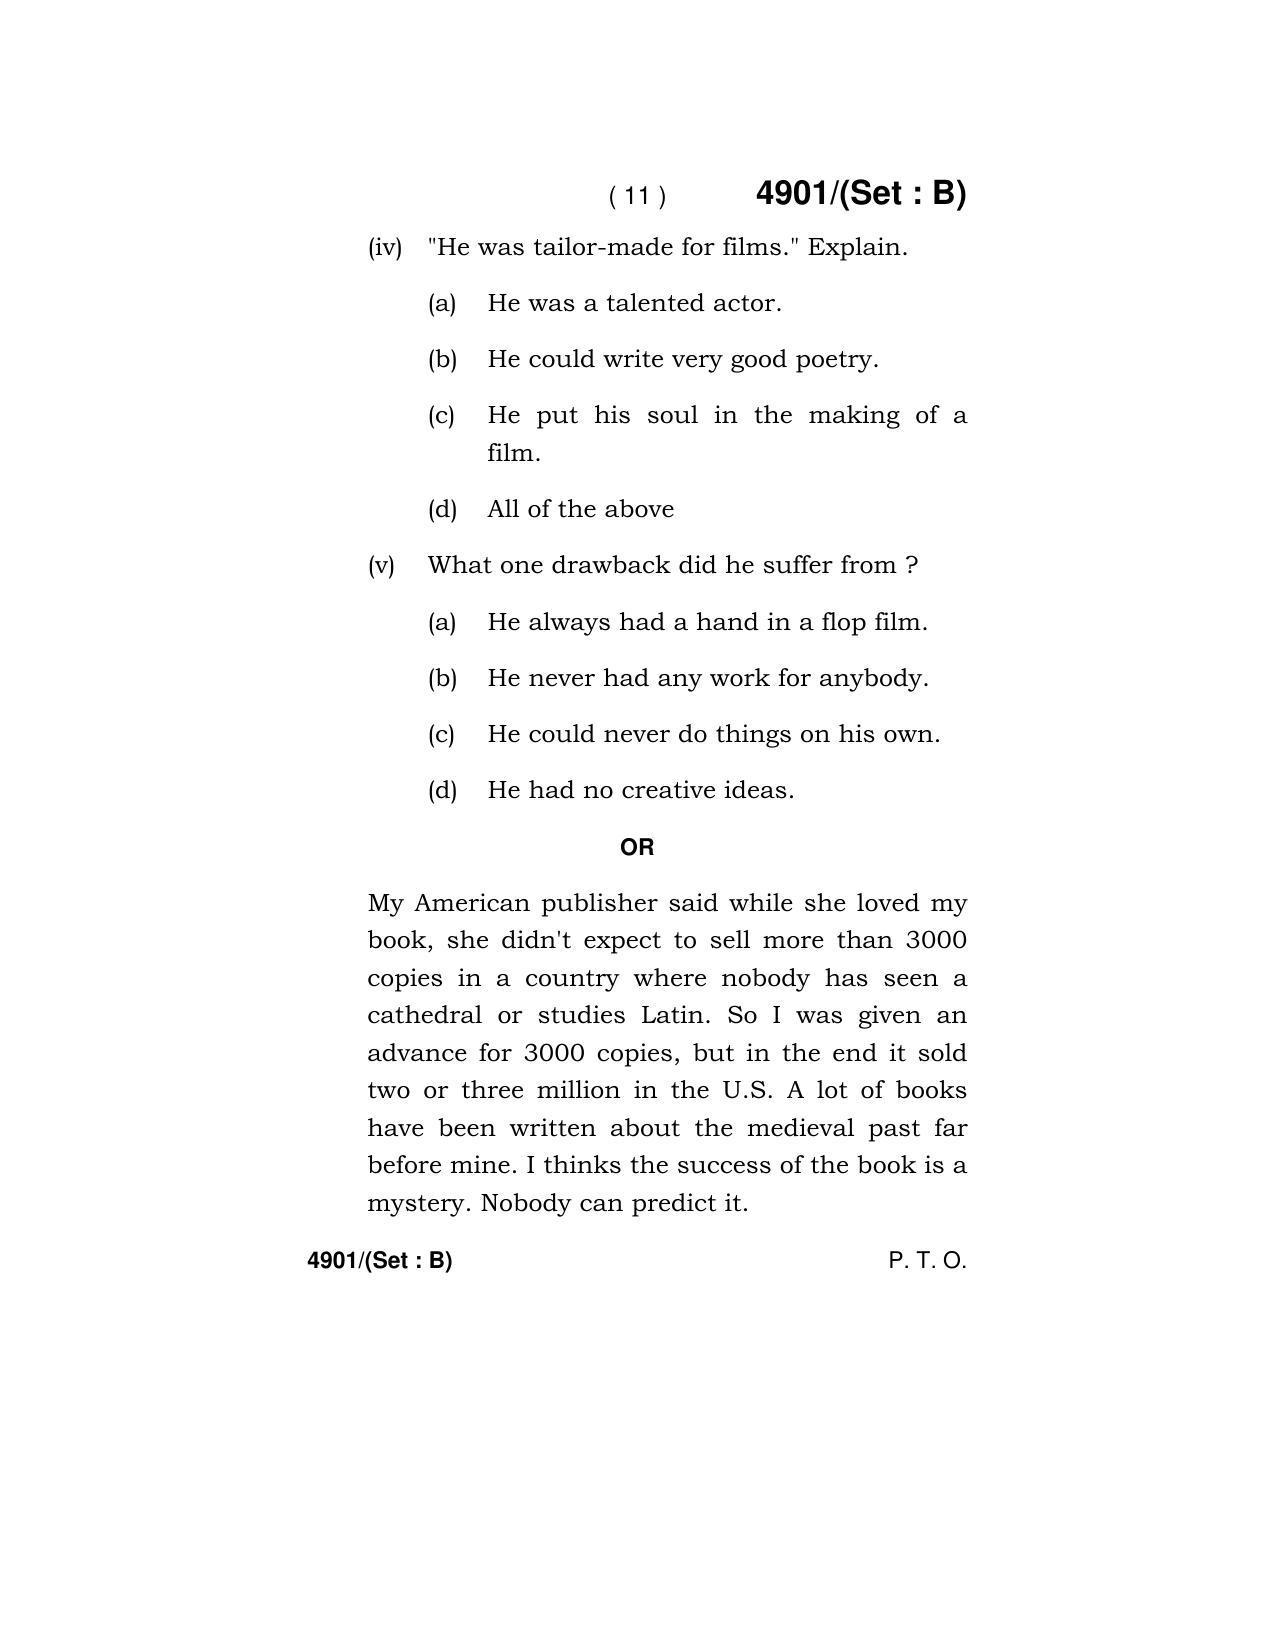 Haryana Board HBSE Class 12 English Core 2020 Question Paper - Page 27